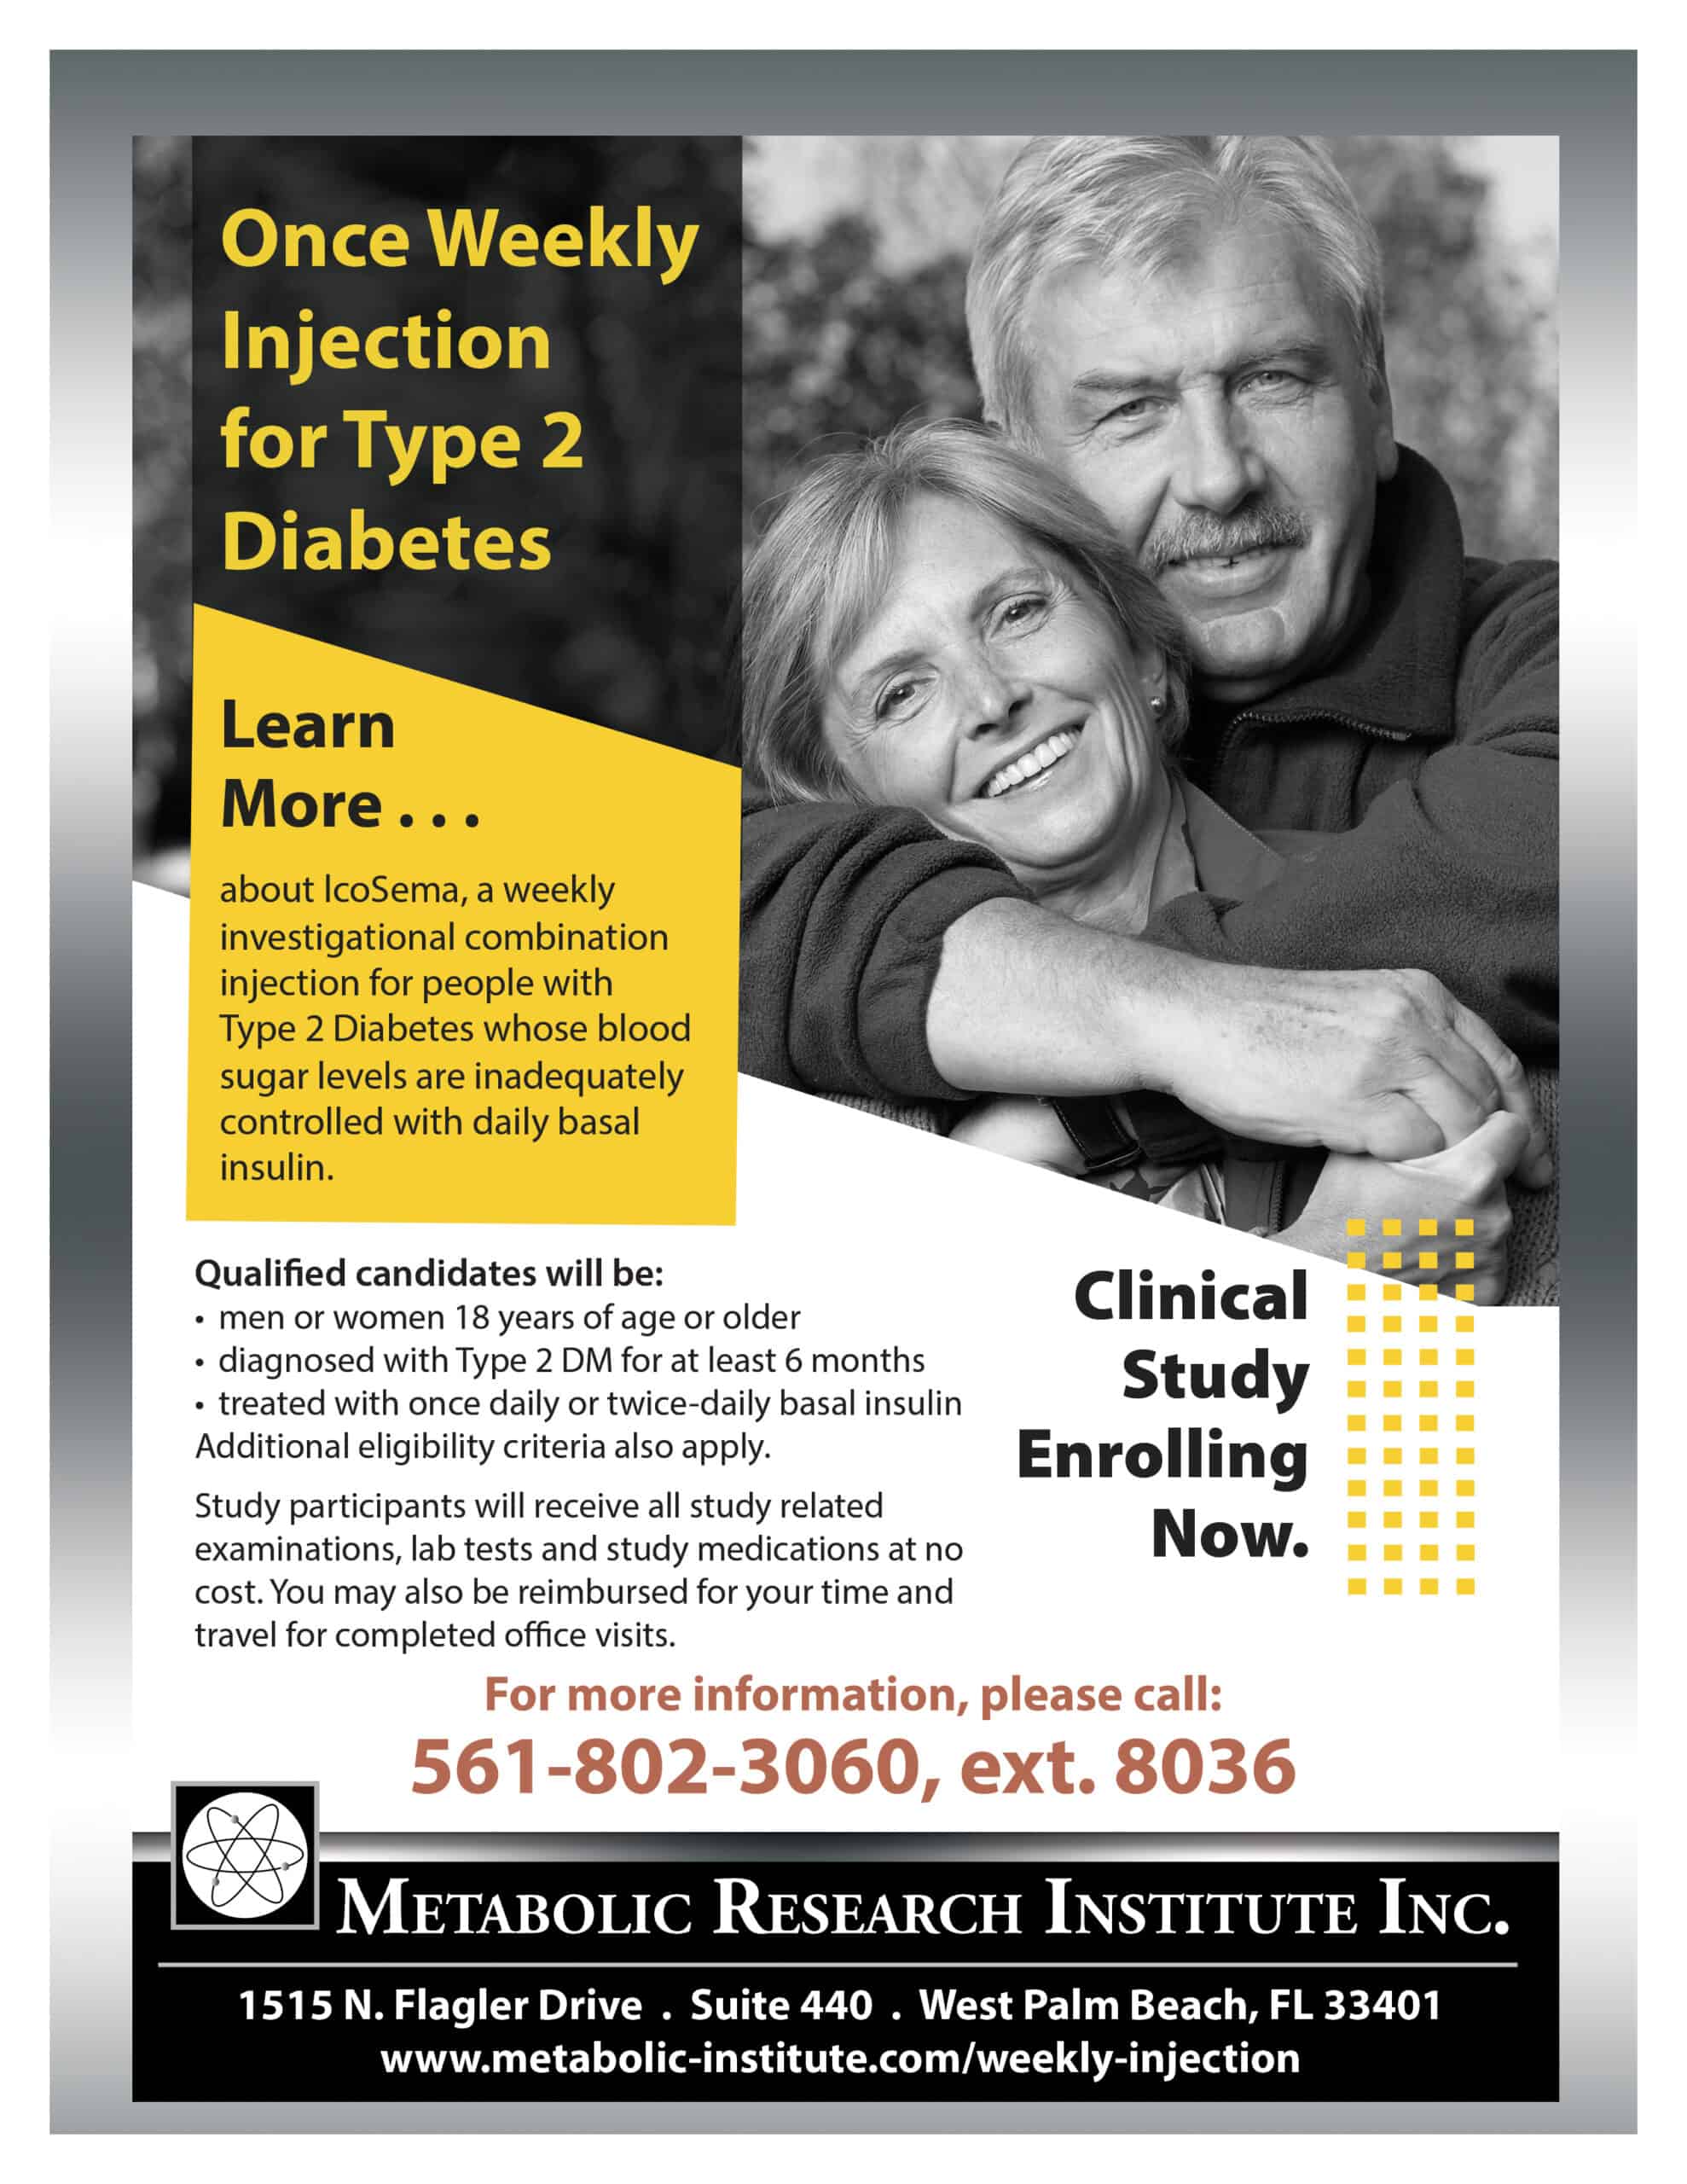 Once weekly insulin for Type 2 Diabetes clinical Study flyer